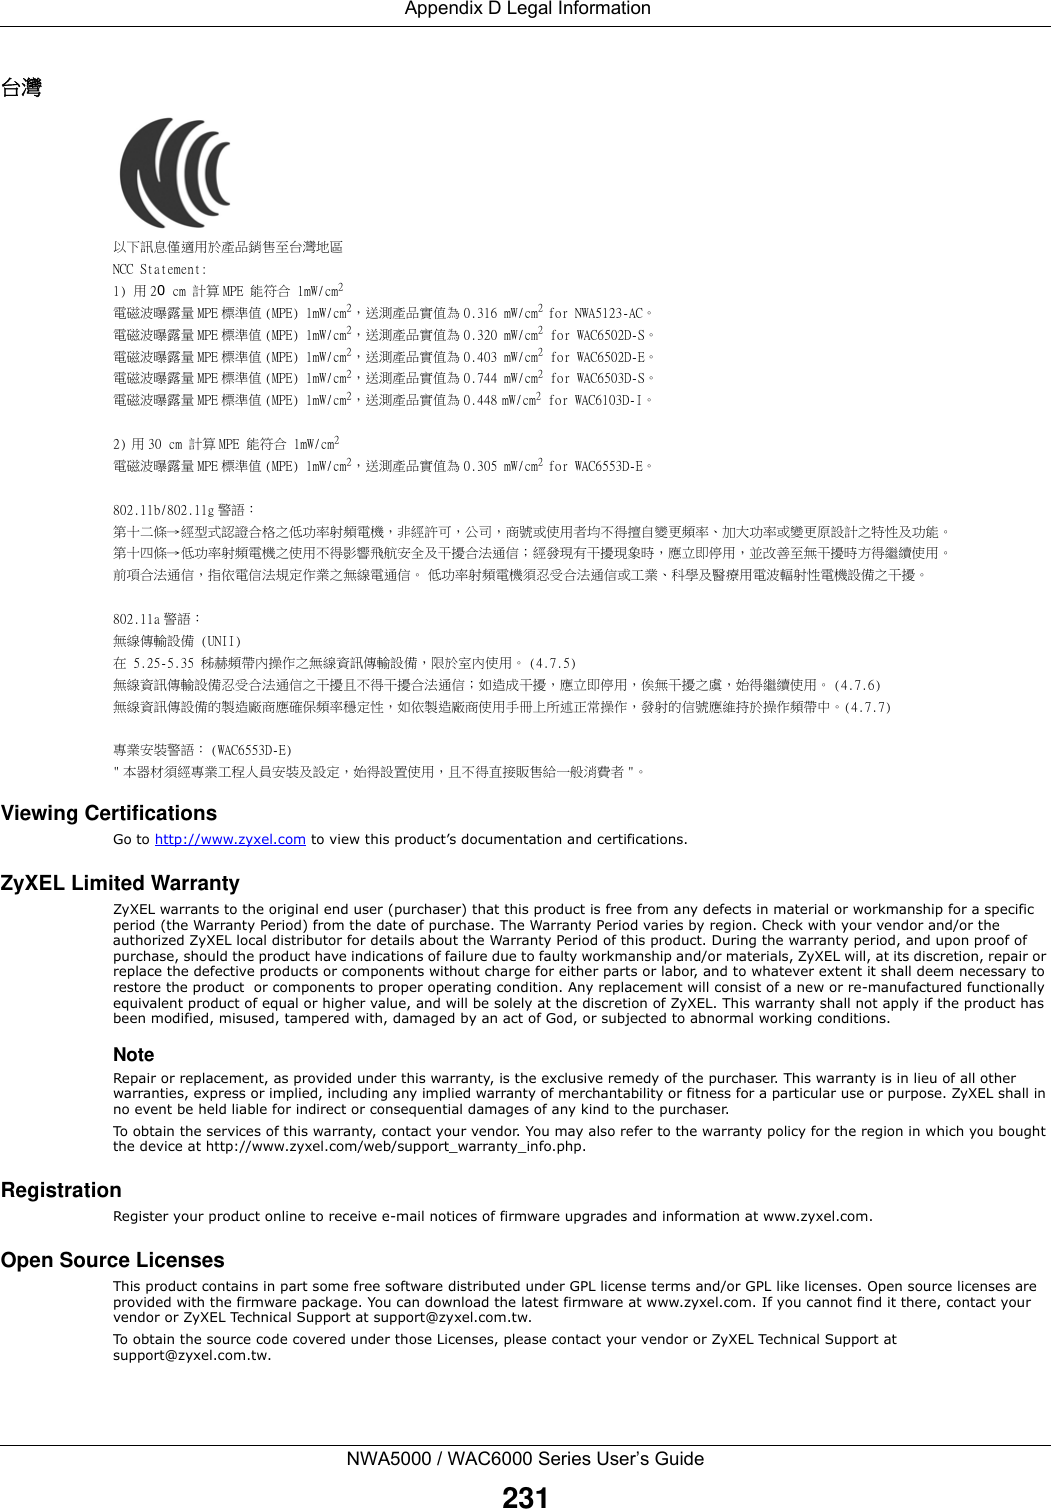  Appendix D Legal InformationNWA5000 / WAC6000 Series User’s Guide231台灣以下訊息僅適用於產品銷售至台灣地區NCC Statement:1) 用 20 cm 計算 MPE 能符合 1mW/cm2電磁波曝露量 MPE 標準值 (MPE) 1mW/cm2，送測產品實值為 0.316 mW/cm2 for NWA5123-AC。電磁波曝露量 MPE 標準值 (MPE) 1mW/cm2，送測產品實值為 0.320 mW/cm2 for WAC6502D-S。電磁波曝露量 MPE 標準值 (MPE) 1mW/cm2，送測產品實值為 0.403 mW/cm2 for WAC6502D-E。電磁波曝露量 MPE 標準值 (MPE) 1mW/cm2，送測產品實值為 0.744 mW/cm2 for WAC6503D-S。電磁波曝露量 MPE 標準值 (MPE) 1mW/cm2，送測產品實值為 0.448 mW/cm2 for WAC6103D-I。2) 用 30 cm 計算 MPE 能符合 1mW/cm2電磁波曝露量 MPE 標準值 (MPE) 1mW/cm2，送測產品實值為 0.305 mW/cm2 for WAC6553D-E。802.11b/802.11g 警語：第十二條→經型式認證合格之低功率射頻電機，非經許可，公司，商號或使用者均不得擅自變更頻率、加大功率或變更原設計之特性及功能。第十四條→低功率射頻電機之使用不得影響飛航安全及干擾合法通信；經發現有干擾現象時，應立即停用，並改善至無干擾時方得繼續使用。前項合法通信，指依電信法規定作業之無線電通信。 低功率射頻電機須忍受合法通信或工業、科學及醫療用電波輻射性電機設備之干擾。802.11a 警語：無線傳輸設備 (UNII) 在 5.25-5.35 秭赫頻帶內操作之無線資訊傳輸設備，限於室內使用。 (4.7.5)無線資訊傳輸設備忍受合法通信之干擾且不得干擾合法通信；如造成干擾，應立即停用，俟無干擾之虞，始得繼續使用。 (4.7.6)無線資訊傳設備的製造廠商應確保頻率穩定性，如依製造廠商使用手冊上所述正常操作，發射的信號應維持於操作頻帶中。(4.7.7)專業安裝警語： (WAC6553D-E)&quot; 本器材須經專業工程人員安裝及設定，始得設置使用，且不得直接販售給一般消費者 &quot;。Viewing CertificationsGo to http://www.zyxel.com to view this product’s documentation and certifications.ZyXEL Limited WarrantyZyXEL warrants to the original end user (purchaser) that this product is free from any defects in material or workmanship for a specific period (the Warranty Period) from the date of purchase. The Warranty Period varies by region. Check with your vendor and/or the authorized ZyXEL local distributor for details about the Warranty Period of this product. During the warranty period, and upon proof of purchase, should the product have indications of failure due to faulty workmanship and/or materials, ZyXEL will, at its discretion, repair or replace the defective products or components without charge for either parts or labor, and to whatever extent it shall deem necessary to restore the product  or components to proper operating condition. Any replacement will consist of a new or re-manufactured functionally equivalent product of equal or higher value, and will be solely at the discretion of ZyXEL. This warranty shall not apply if the product has been modified, misused, tampered with, damaged by an act of God, or subjected to abnormal working conditions.NoteRepair or replacement, as provided under this warranty, is the exclusive remedy of the purchaser. This warranty is in lieu of all other warranties, express or implied, including any implied warranty of merchantability or fitness for a particular use or purpose. ZyXEL shall in no event be held liable for indirect or consequential damages of any kind to the purchaser.To obtain the services of this warranty, contact your vendor. You may also refer to the warranty policy for the region in which you bought the device at http://www.zyxel.com/web/support_warranty_info.php.RegistrationRegister your product online to receive e-mail notices of firmware upgrades and information at www.zyxel.com.Open Source LicensesThis product contains in part some free software distributed under GPL license terms and/or GPL like licenses. Open source licenses are provided with the firmware package. You can download the latest firmware at www.zyxel.com. If you cannot find it there, contact your vendor or ZyXEL Technical Support at support@zyxel.com.tw. To obtain the source code covered under those Licenses, please contact your vendor or ZyXEL Technical Support at support@zyxel.com.tw.  